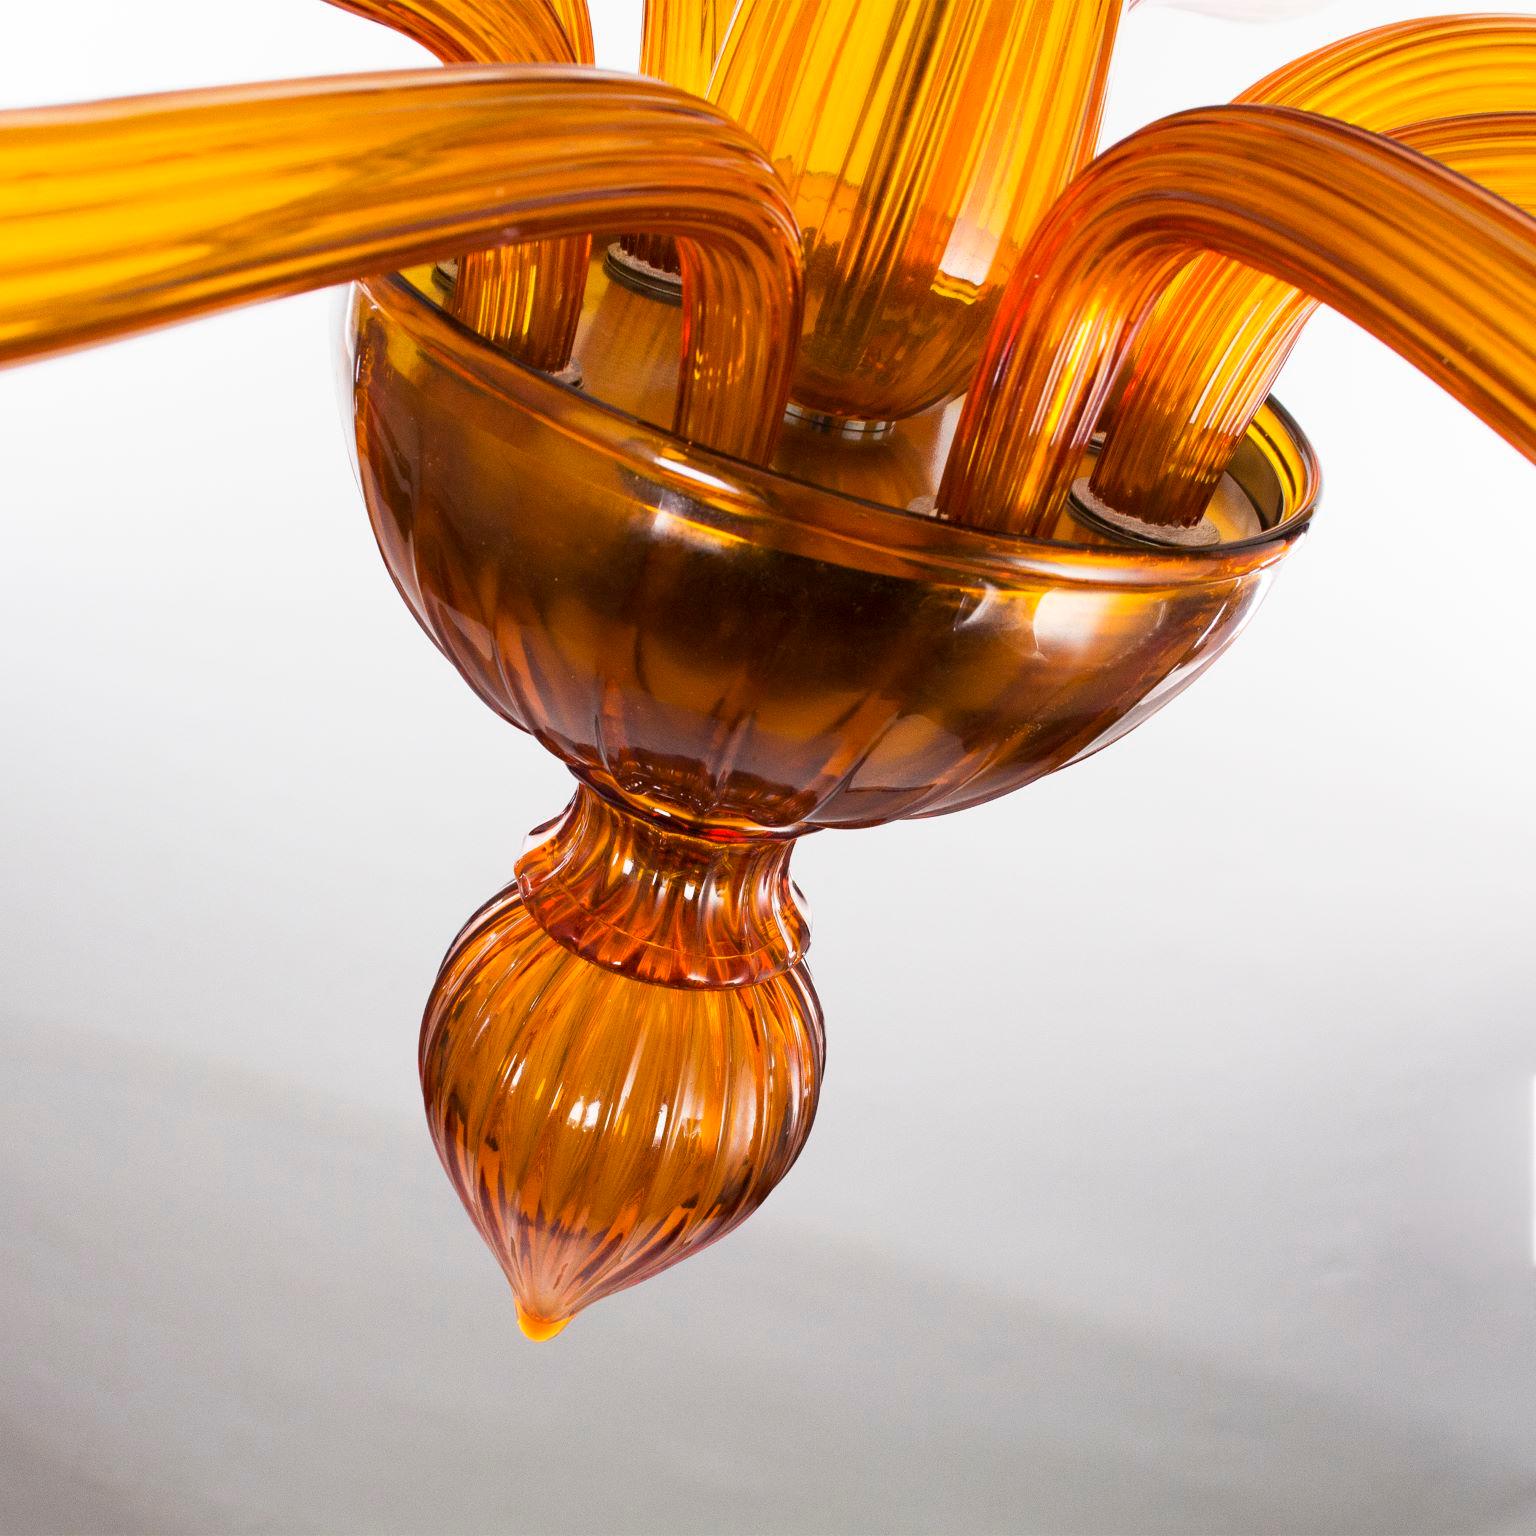 21st Century Chandelier 8arms Amber Murano Glass by Multiforme   In New Condition For Sale In Trebaseleghe, IT